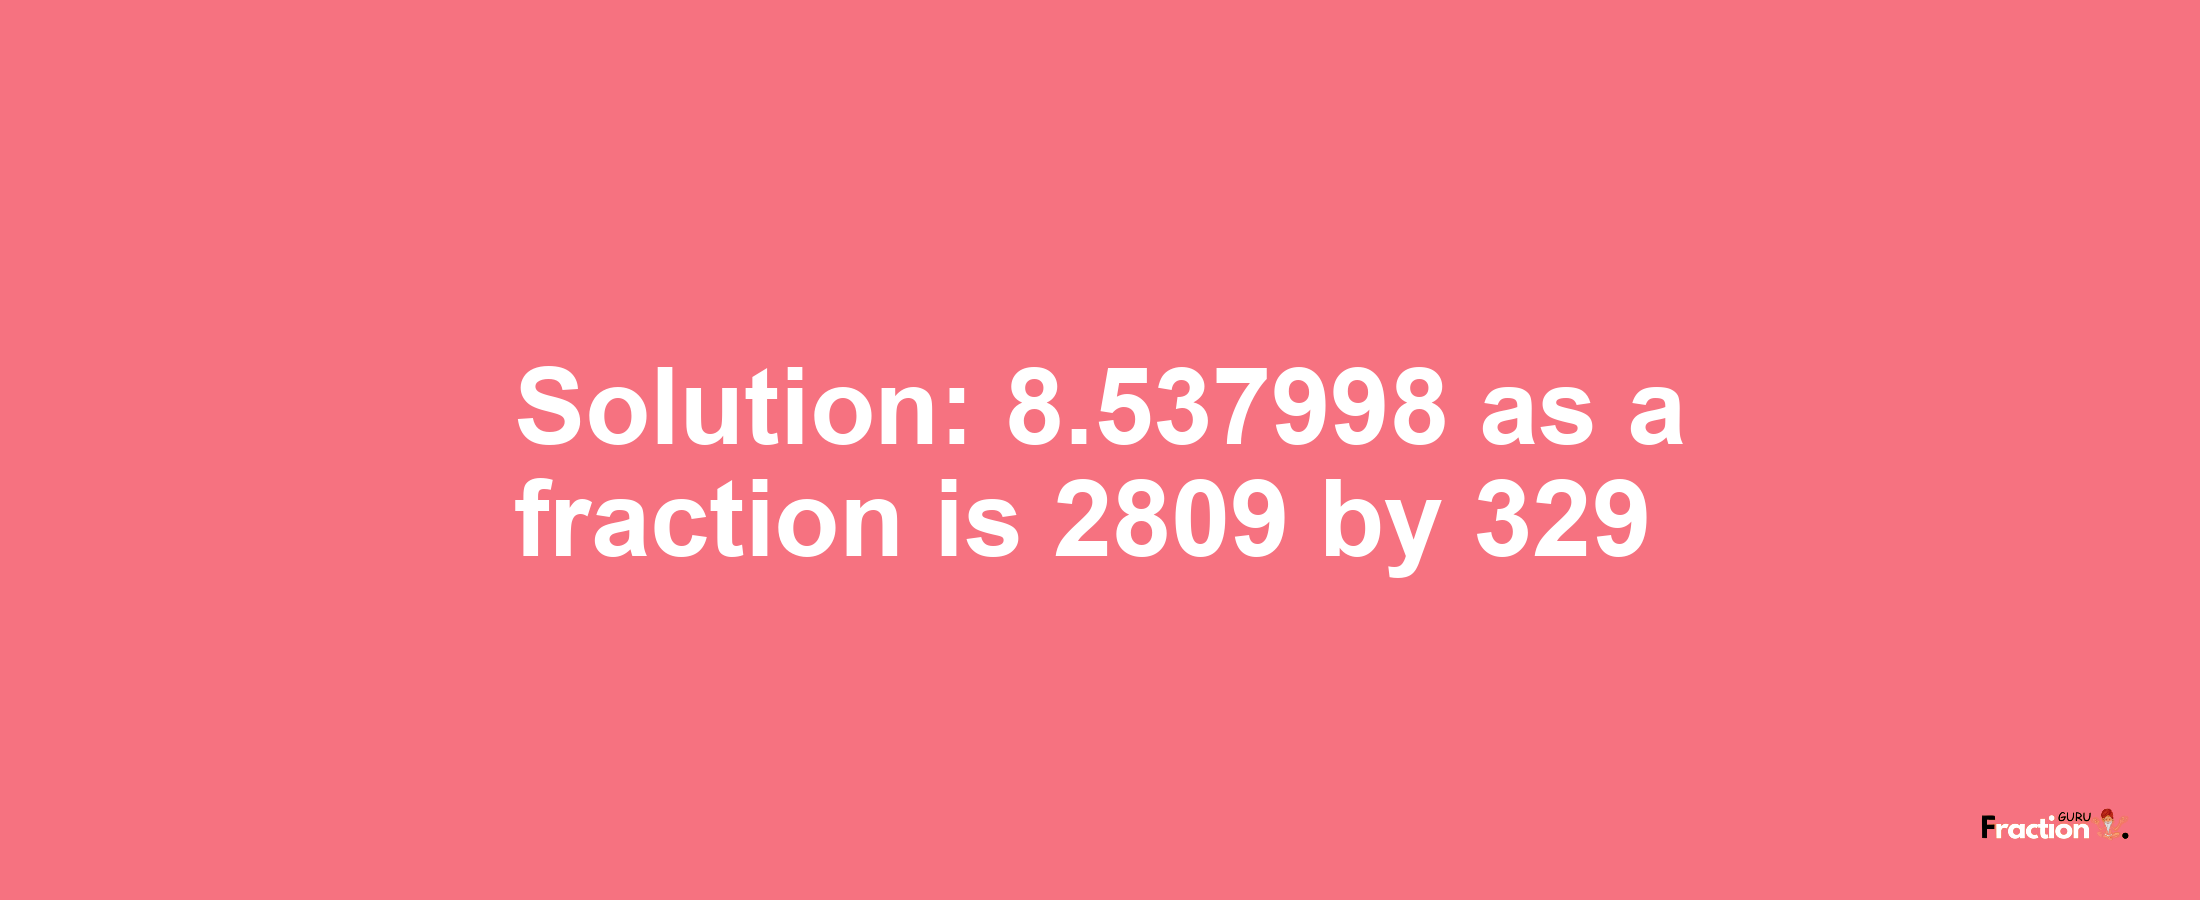 Solution:8.537998 as a fraction is 2809/329